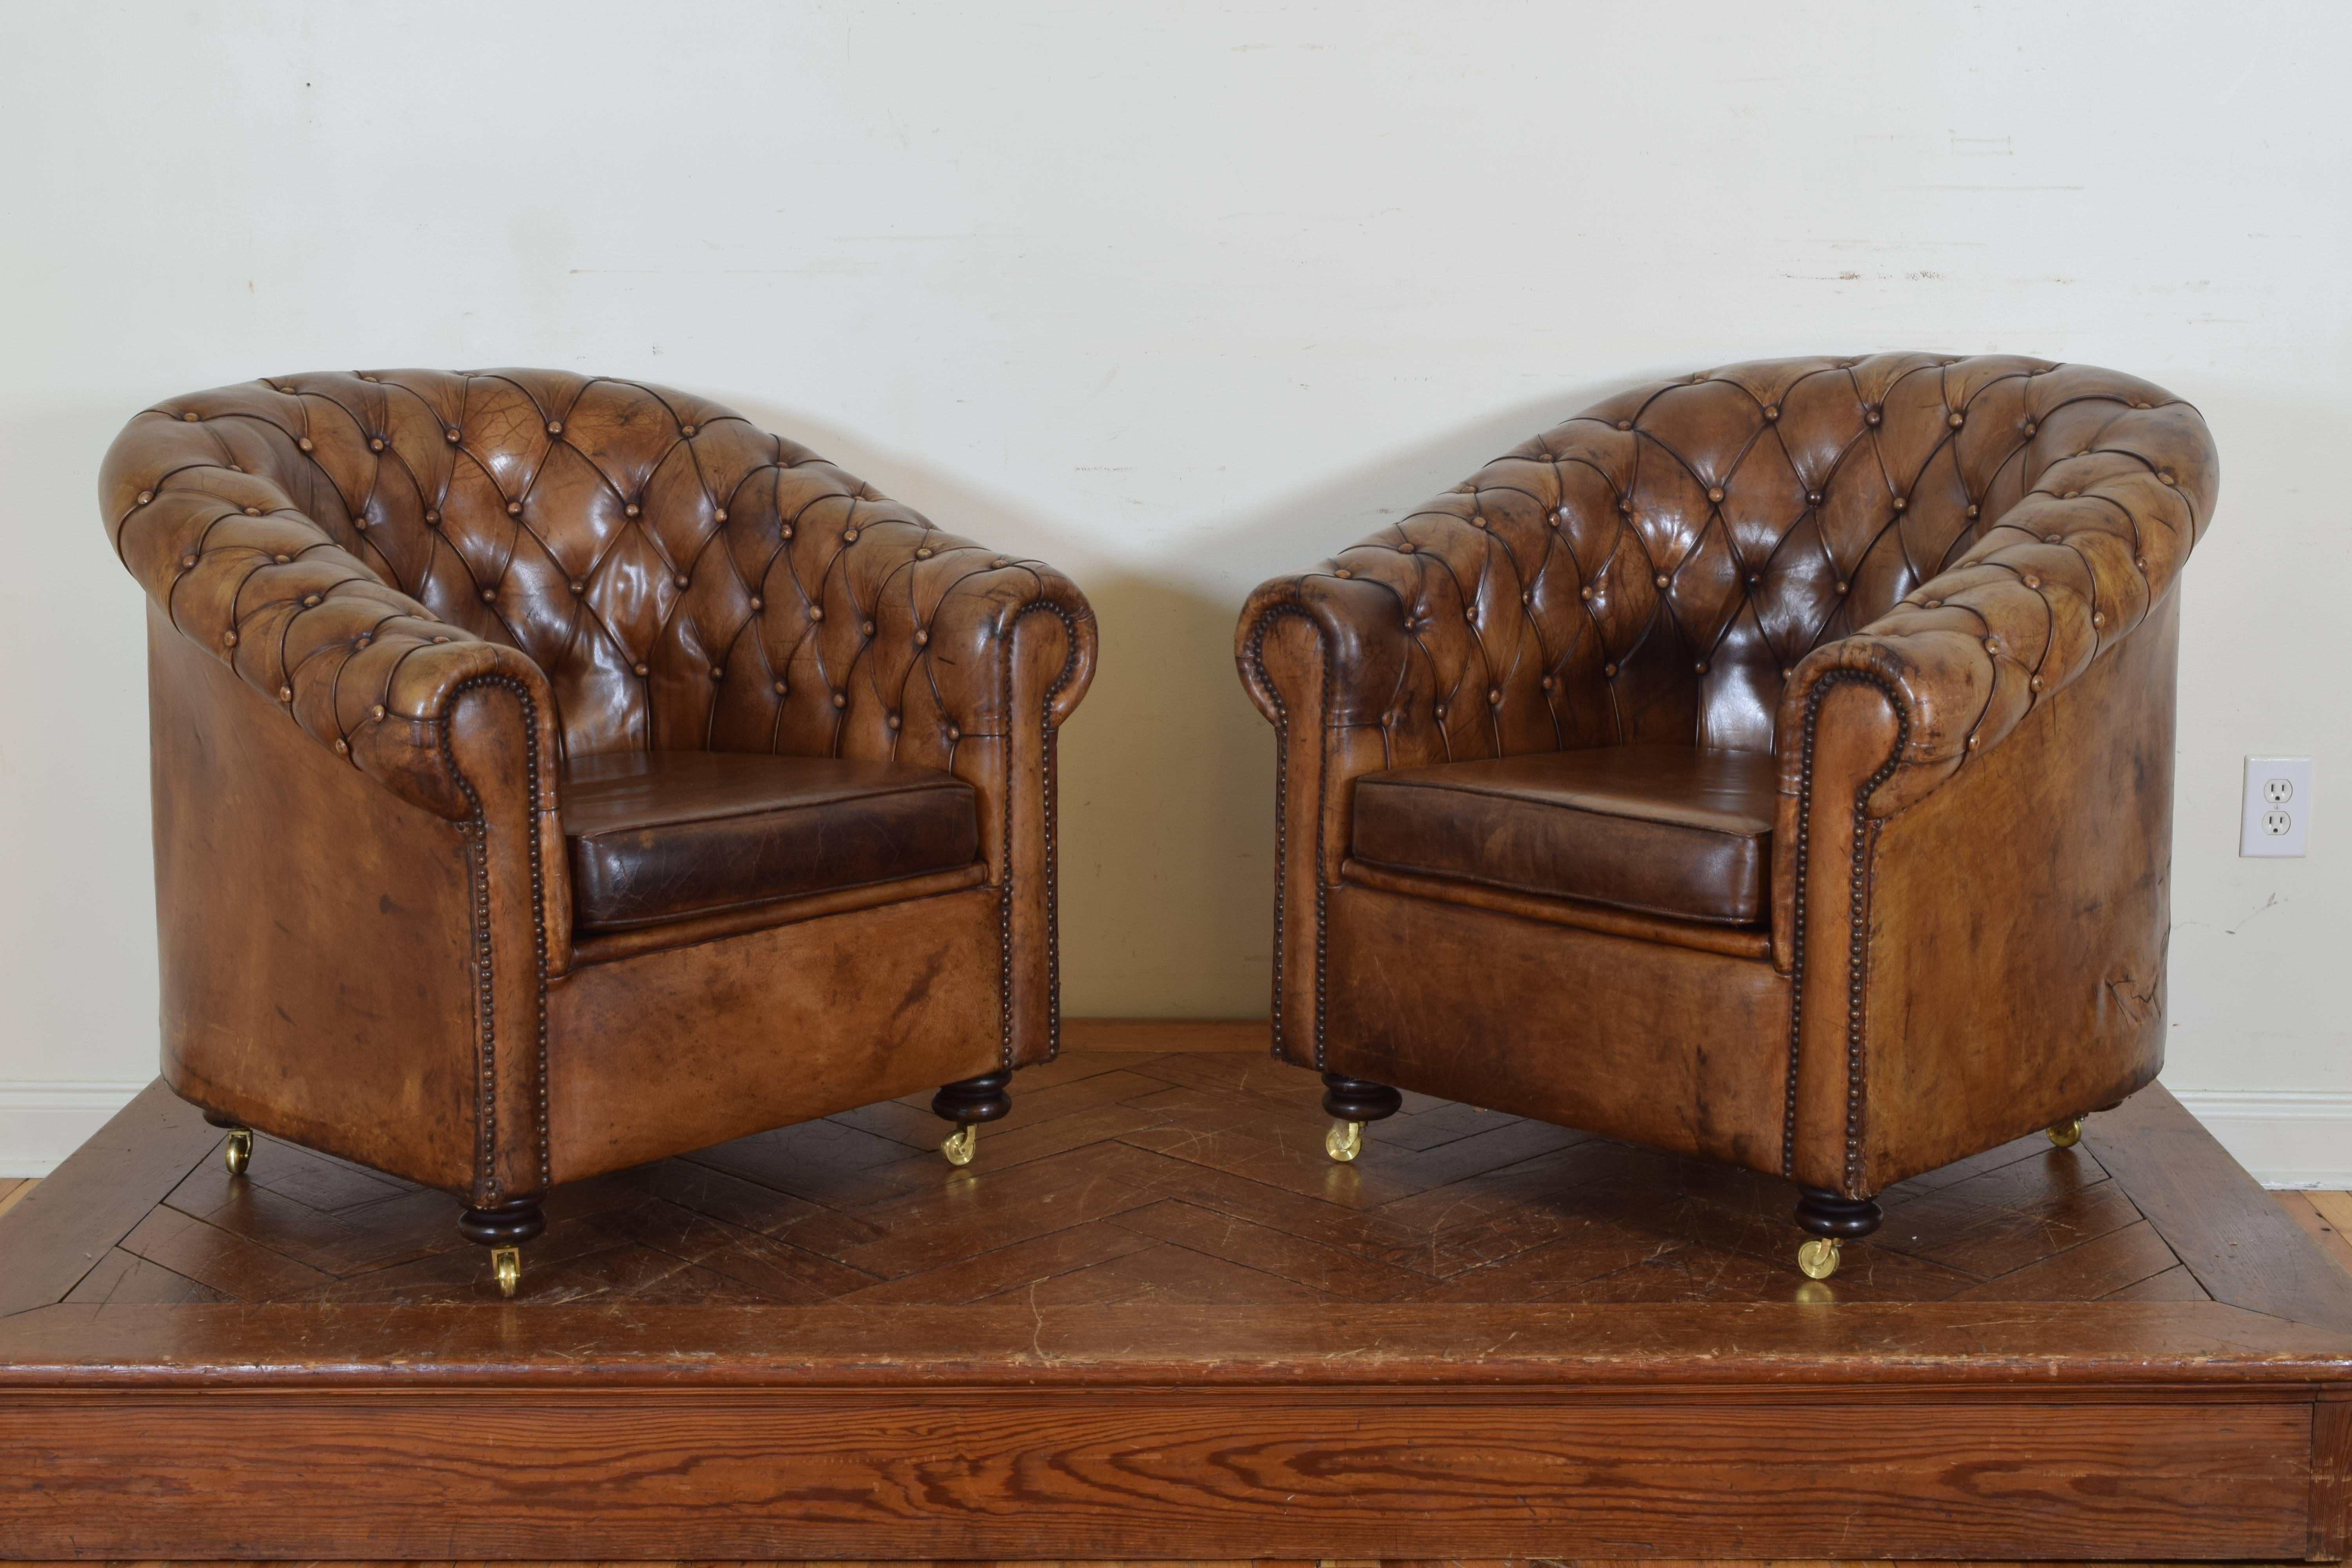 Set of Spanish Tufted Leather Chesterfield Style Seating Furniture, 20th Century 3